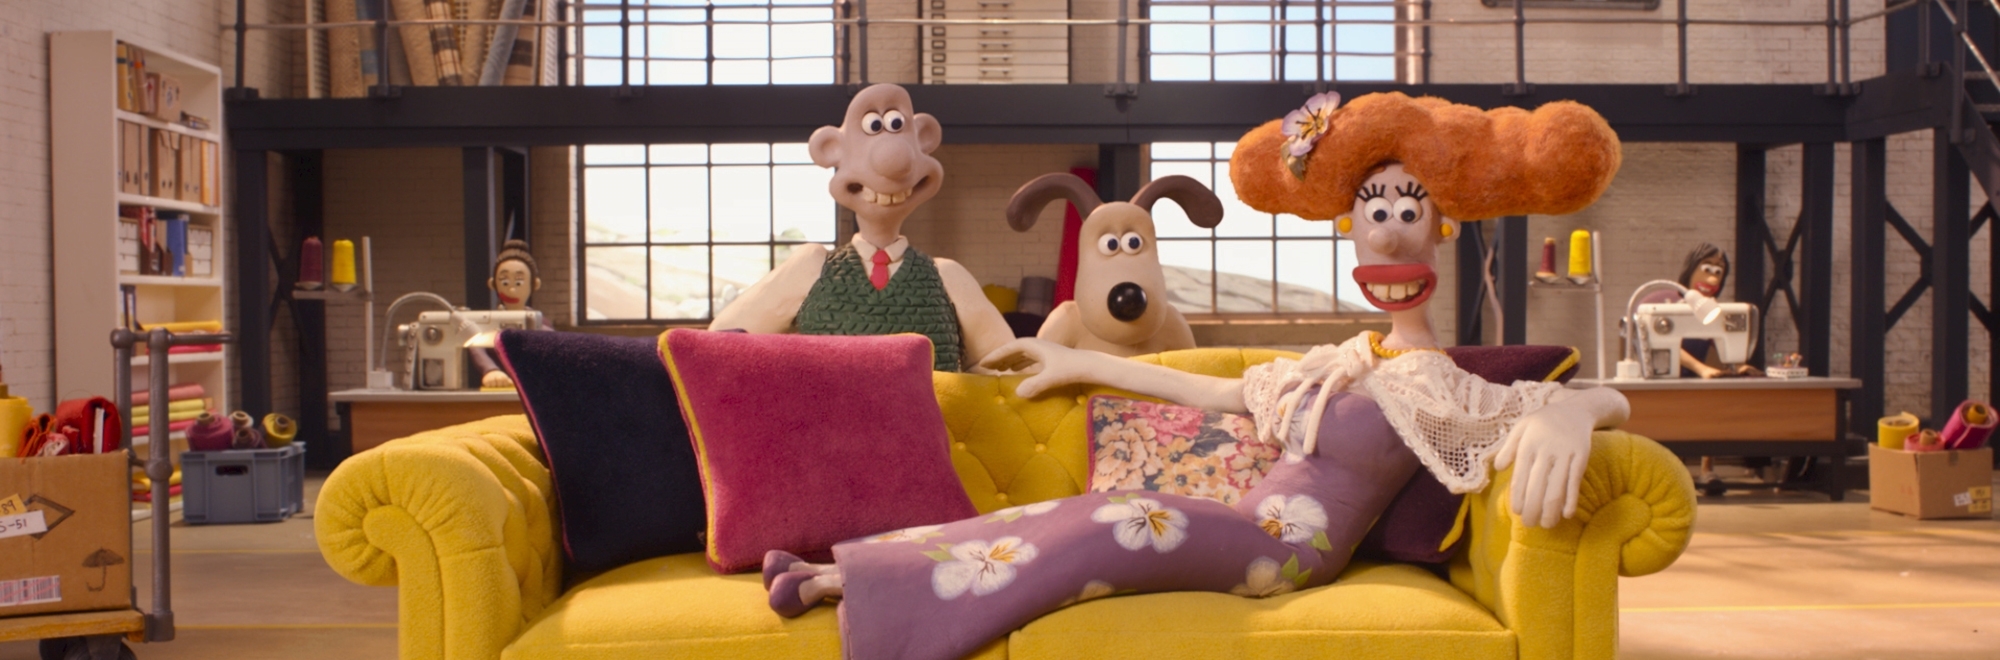 DFS partners with Wallace & Gromit for its Winter Sale campaign in the duo’s 30th anniversary year